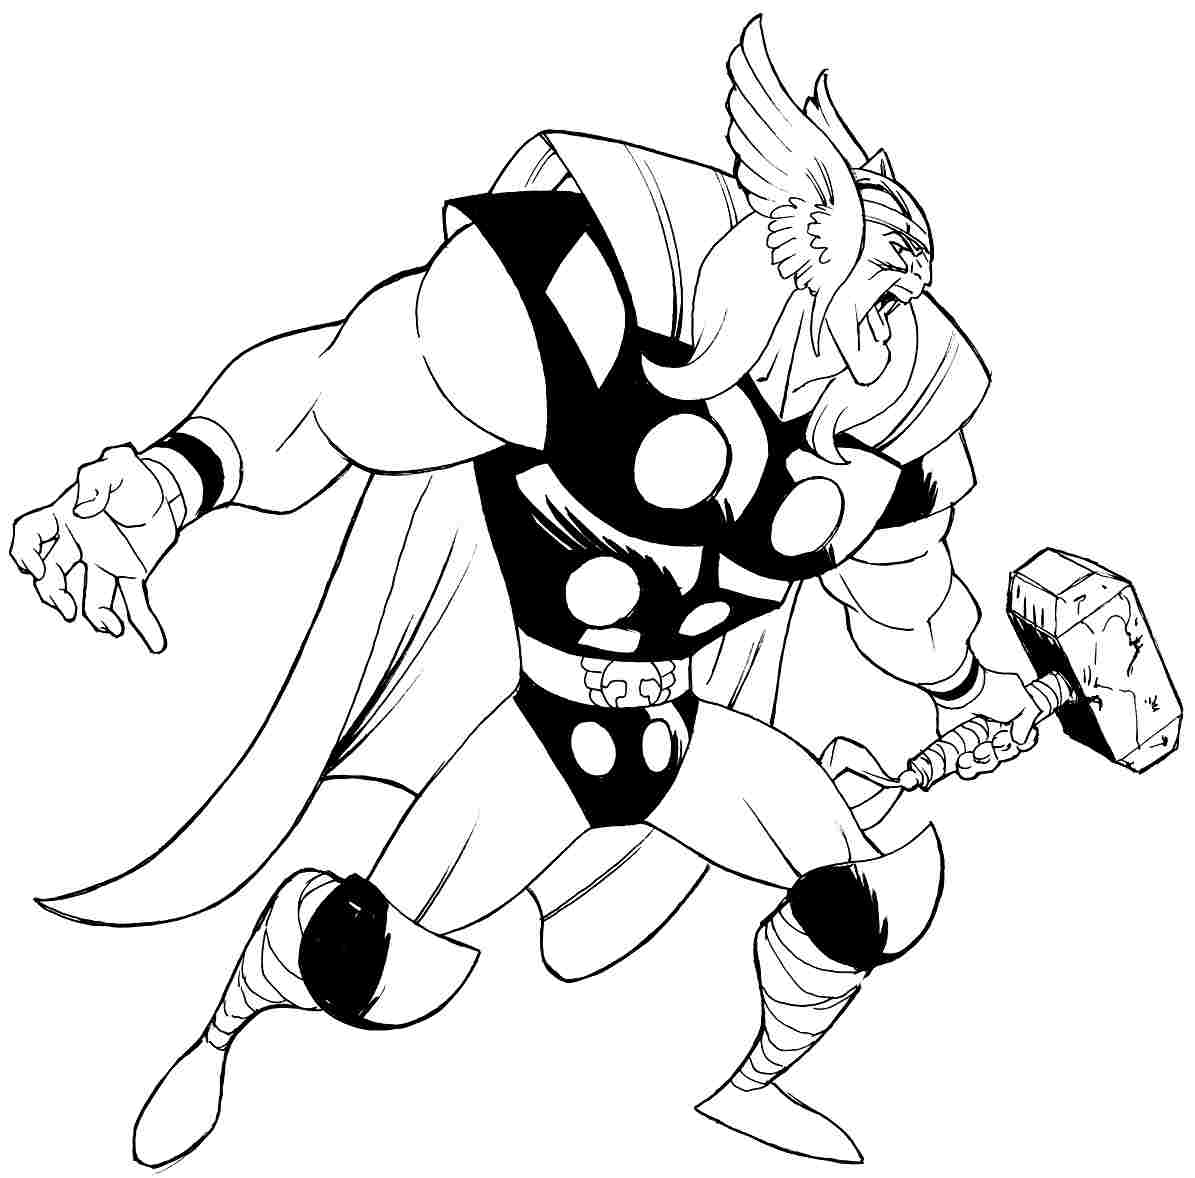 Thor coloring, Download Thor coloring for free 2019